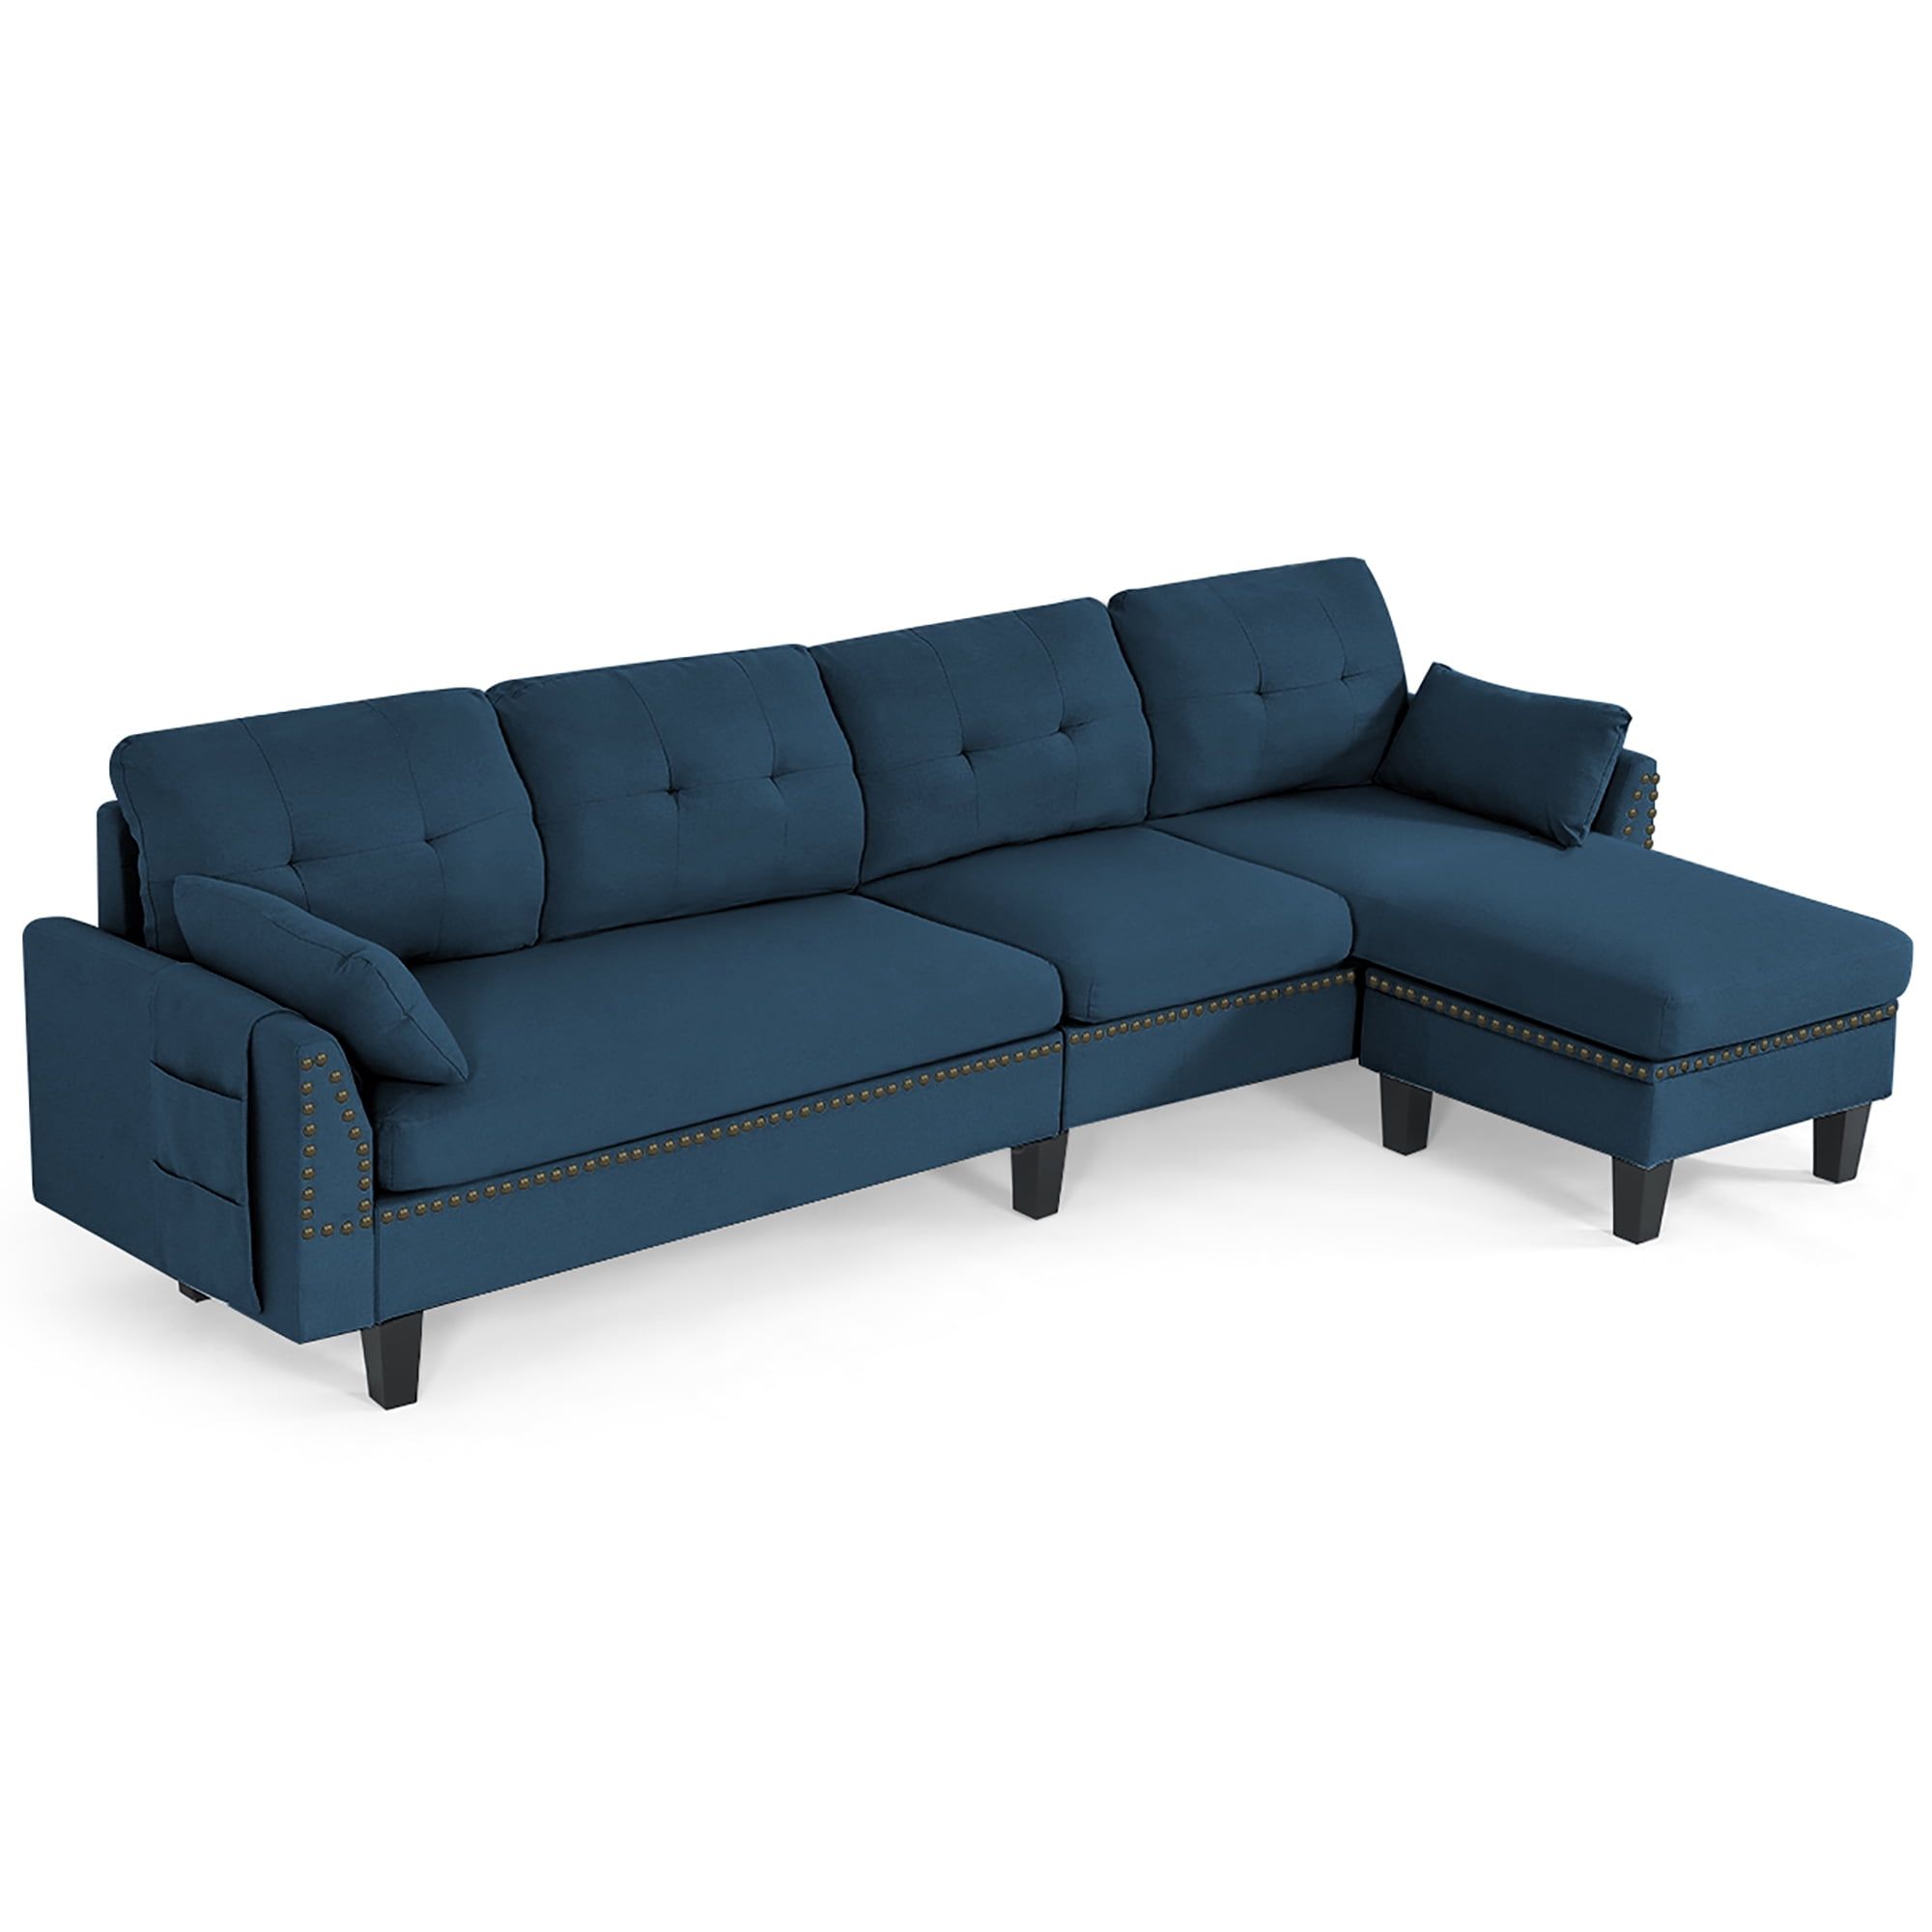 Costway Convertible Sectional Sofa Couch 4 Seat L Shaped Couch W For Convertible L Shaped Sectional Sofas (Gallery 14 of 20)